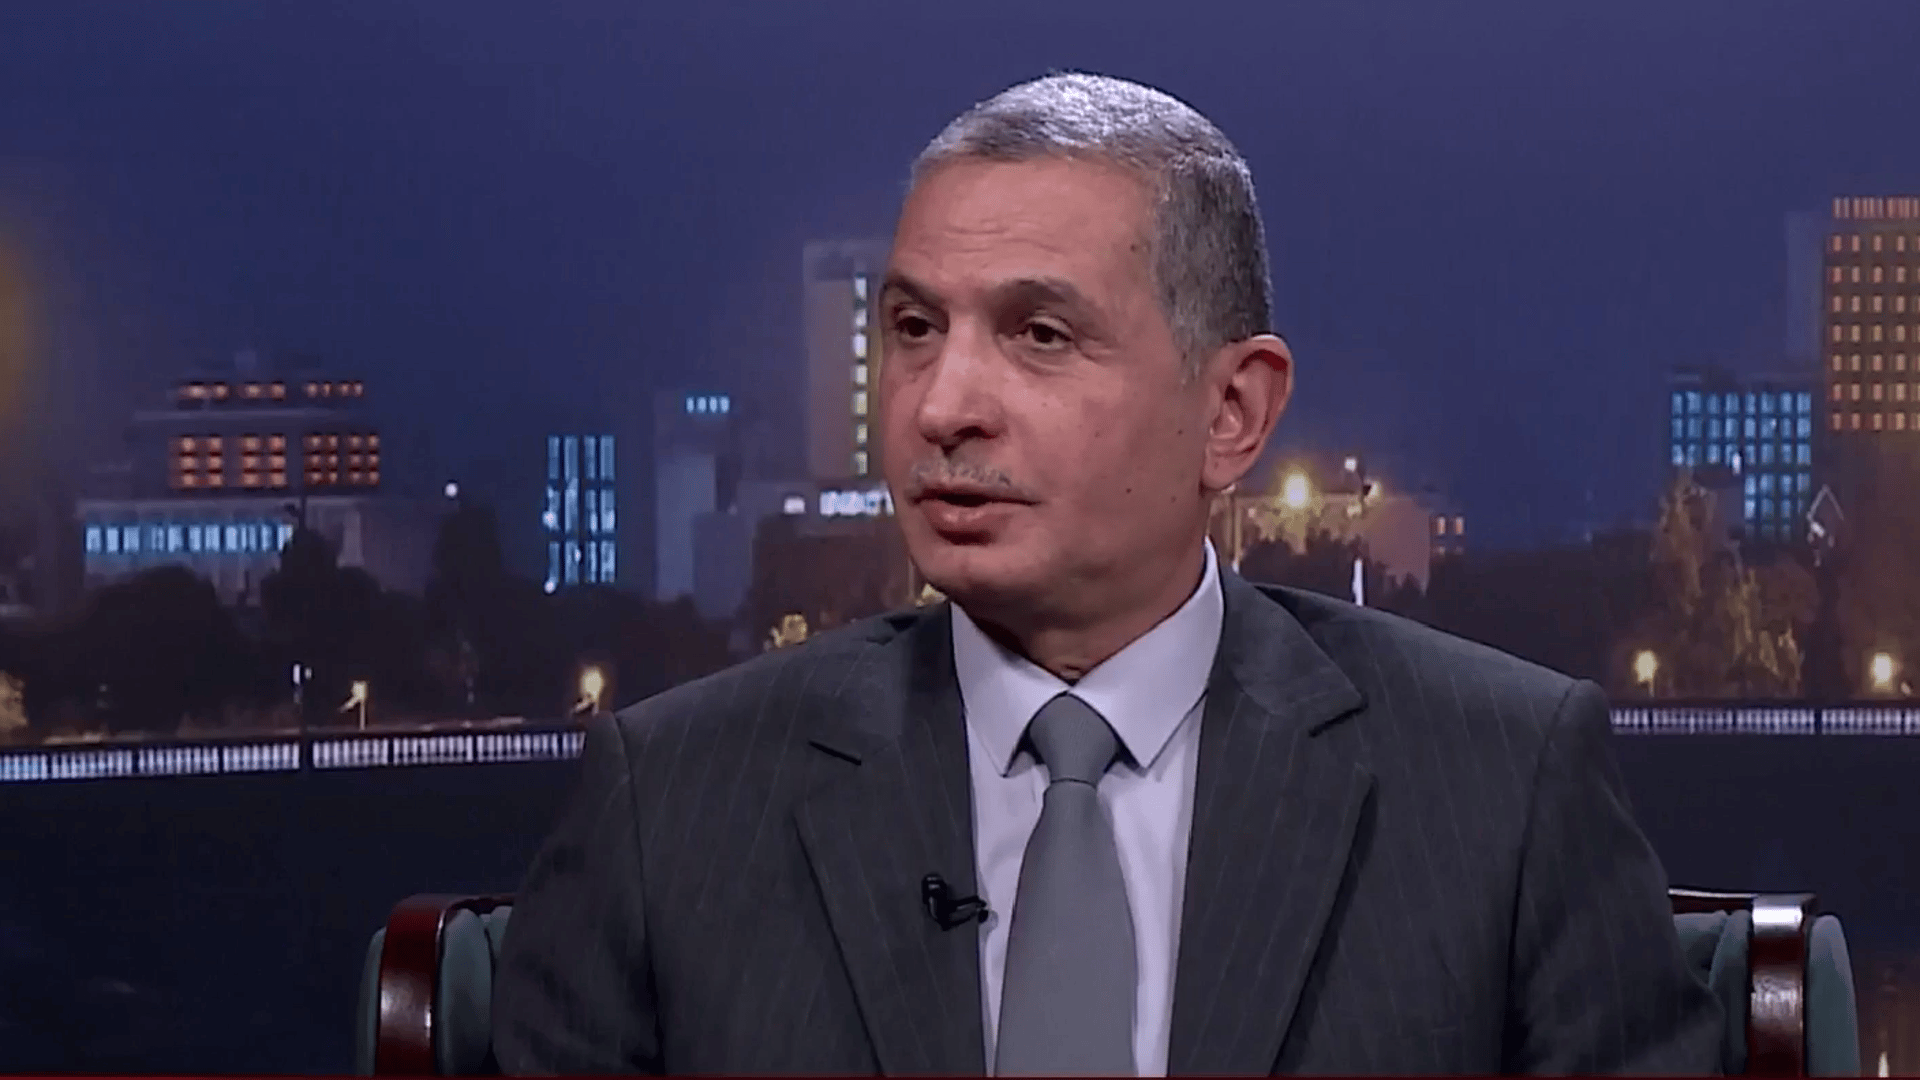 Former Iraqi Army Chief Recounts Flawed Formation and Challenges